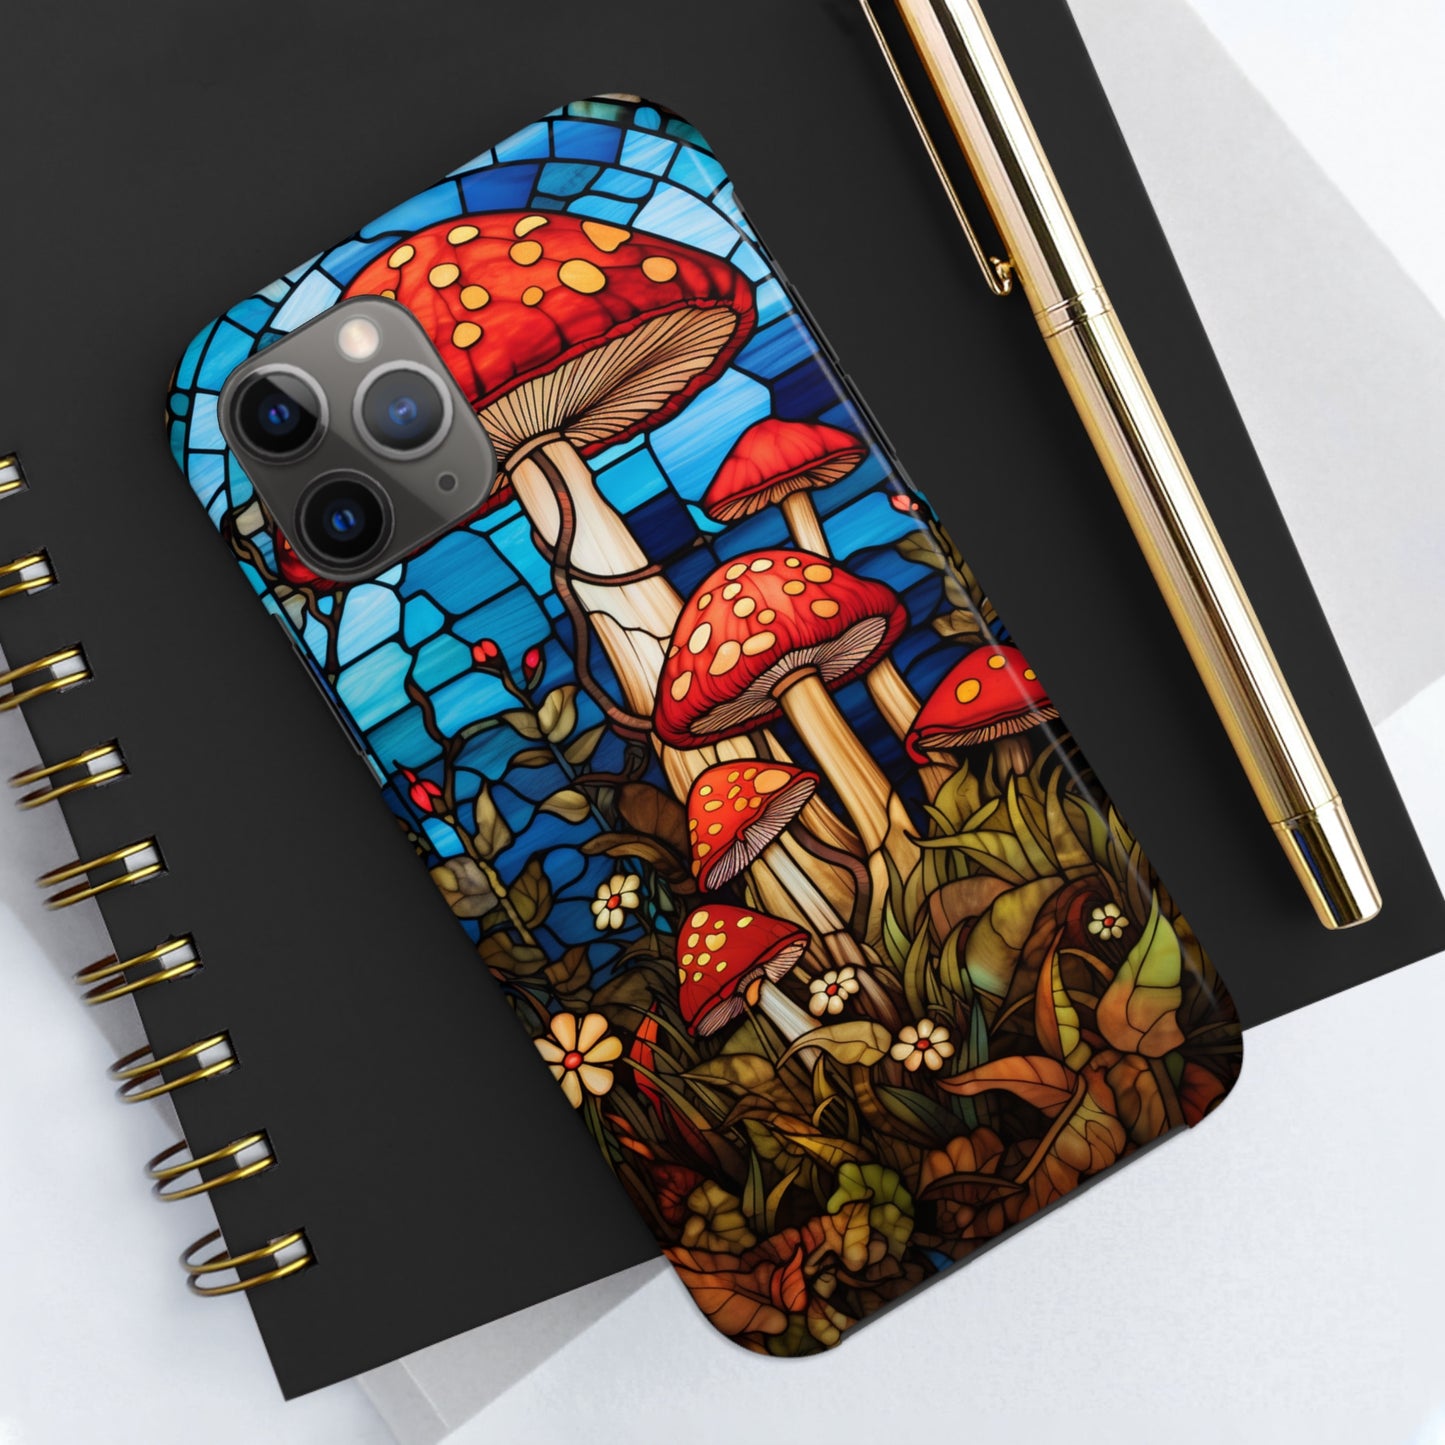 Stained Glass Mushroom Garden iPhone Case | Embrace Whimsical Beauty and Nature's Delight